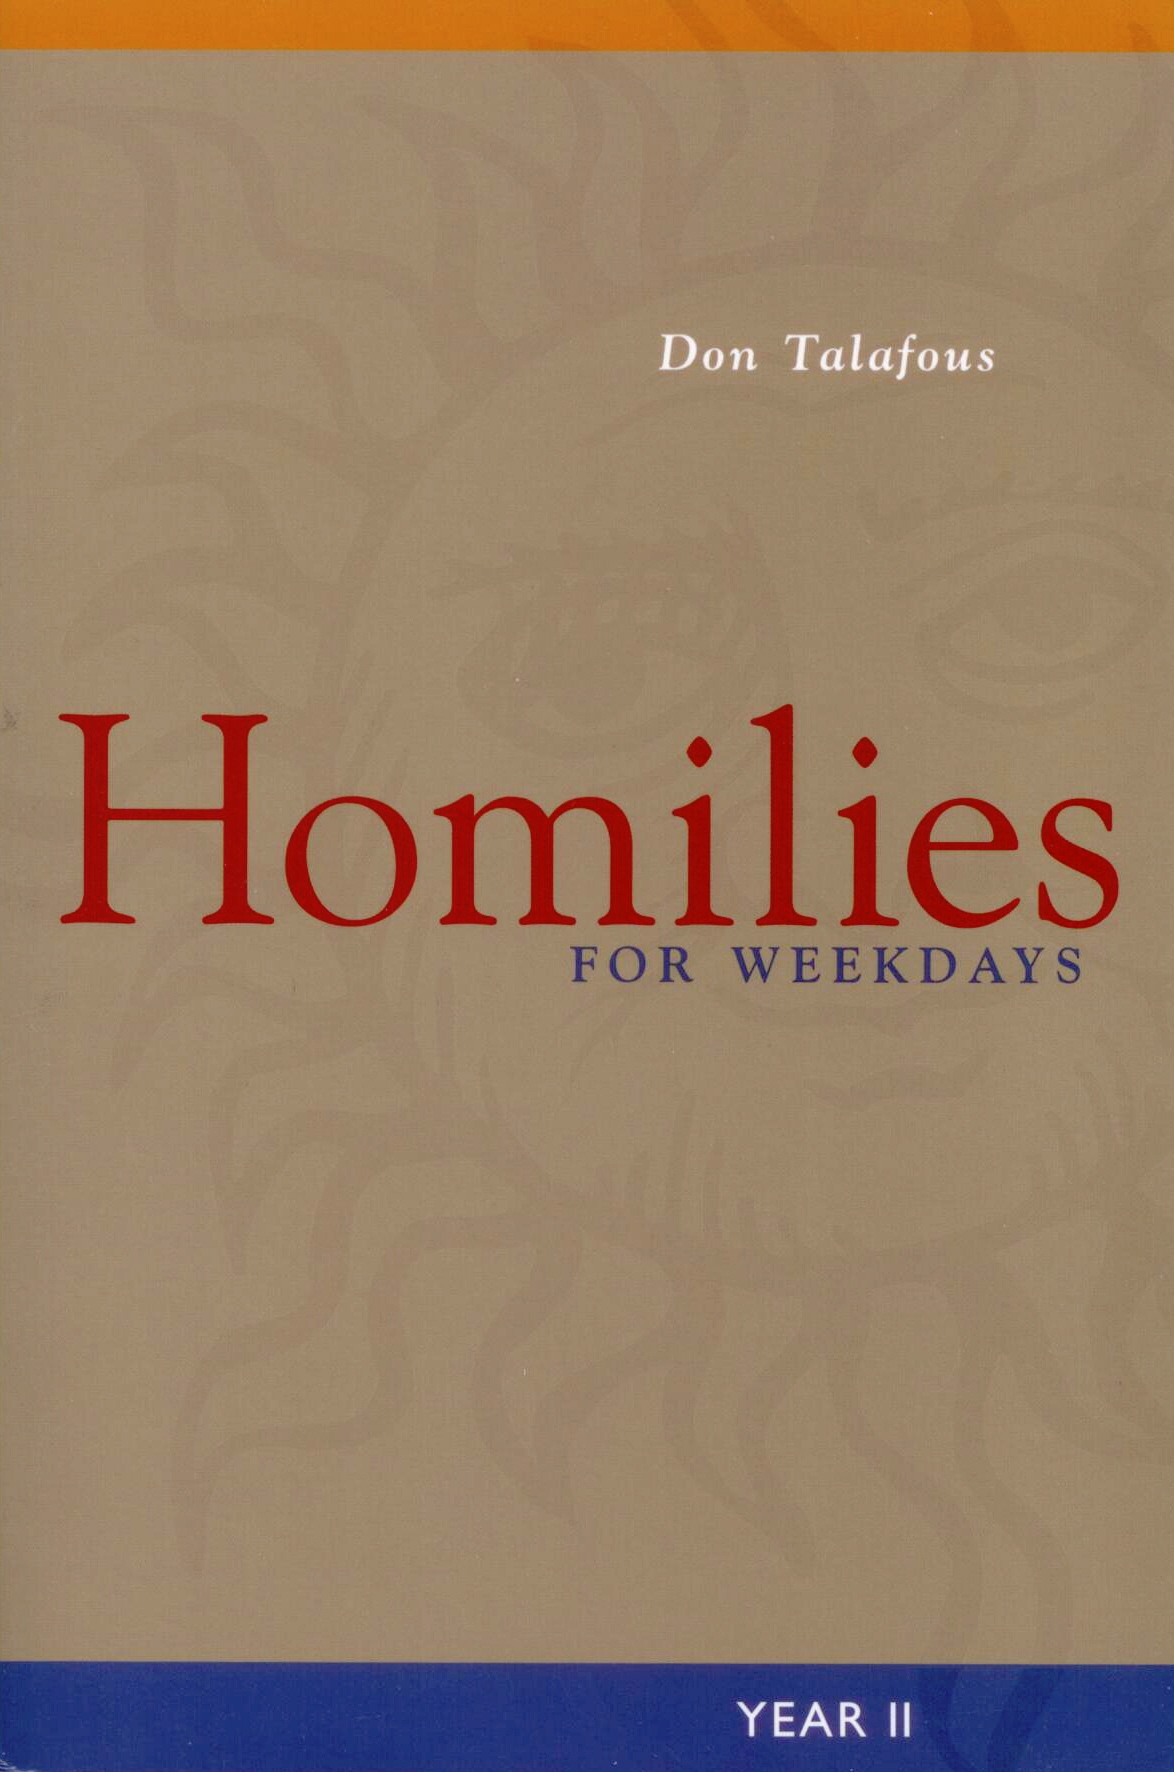 Homilies for Weekdays Year II by Don Talafous